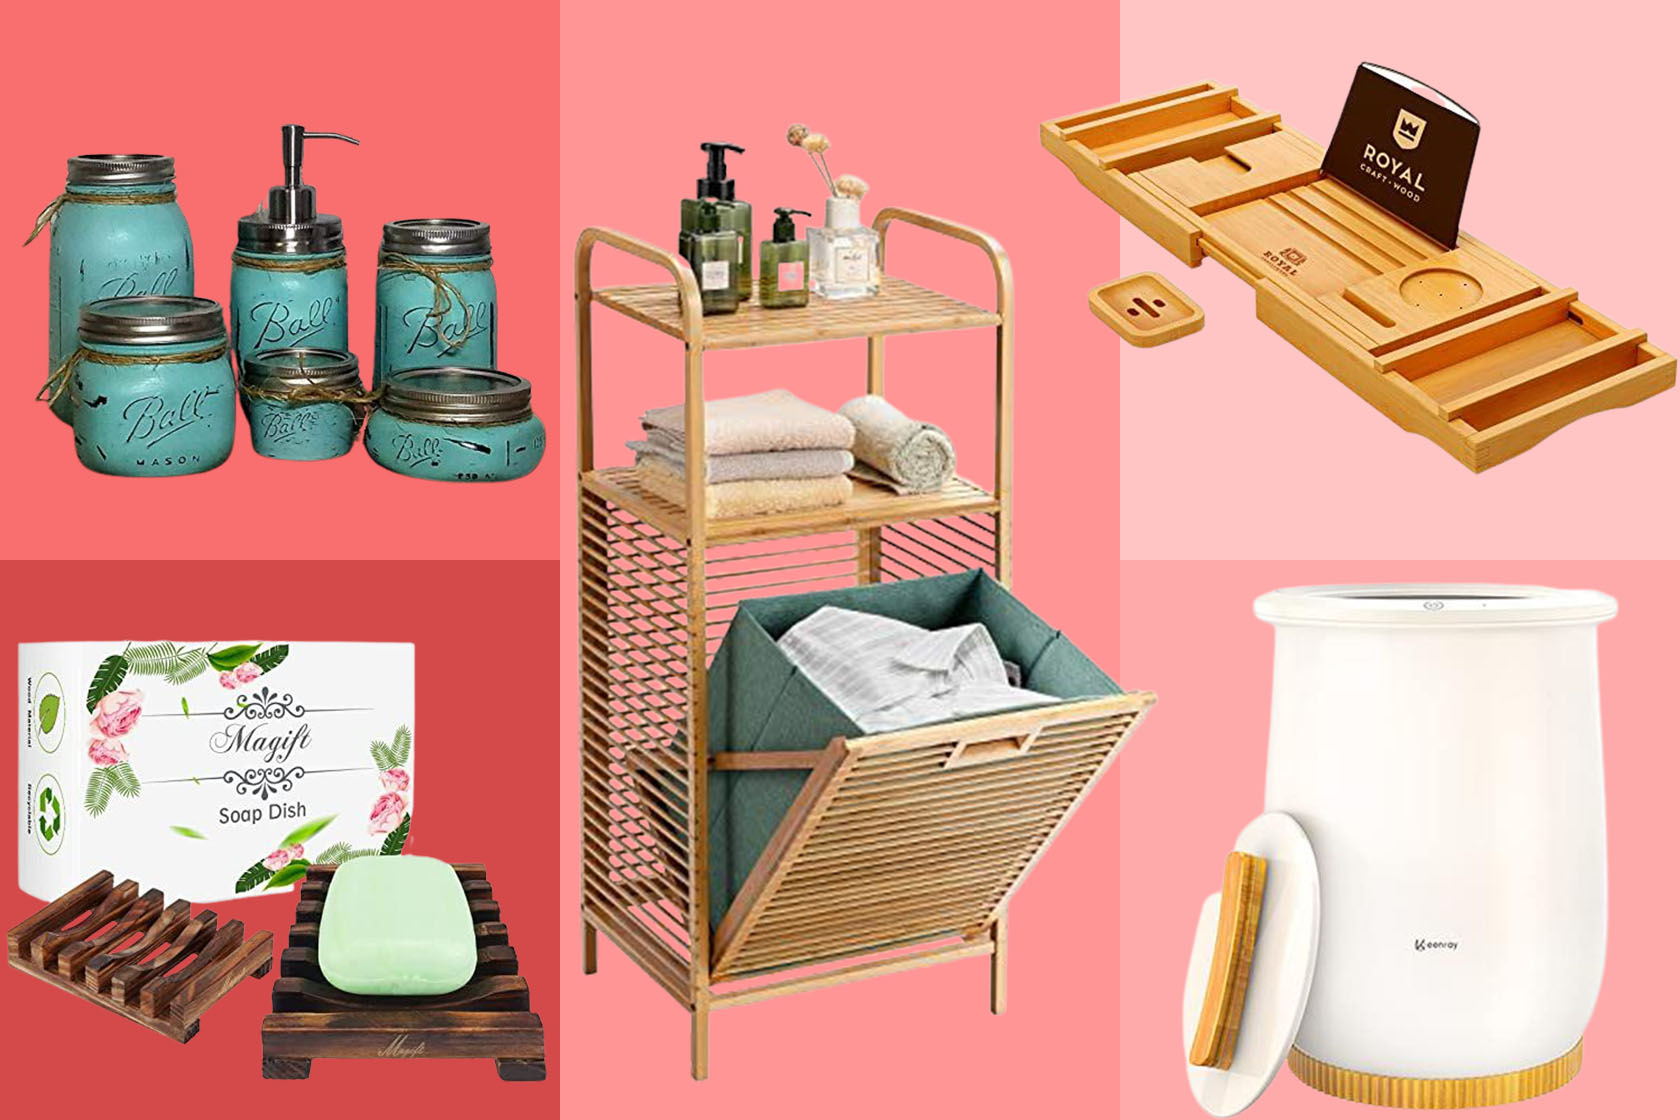 Simple purchases that will give your bathroom some personality